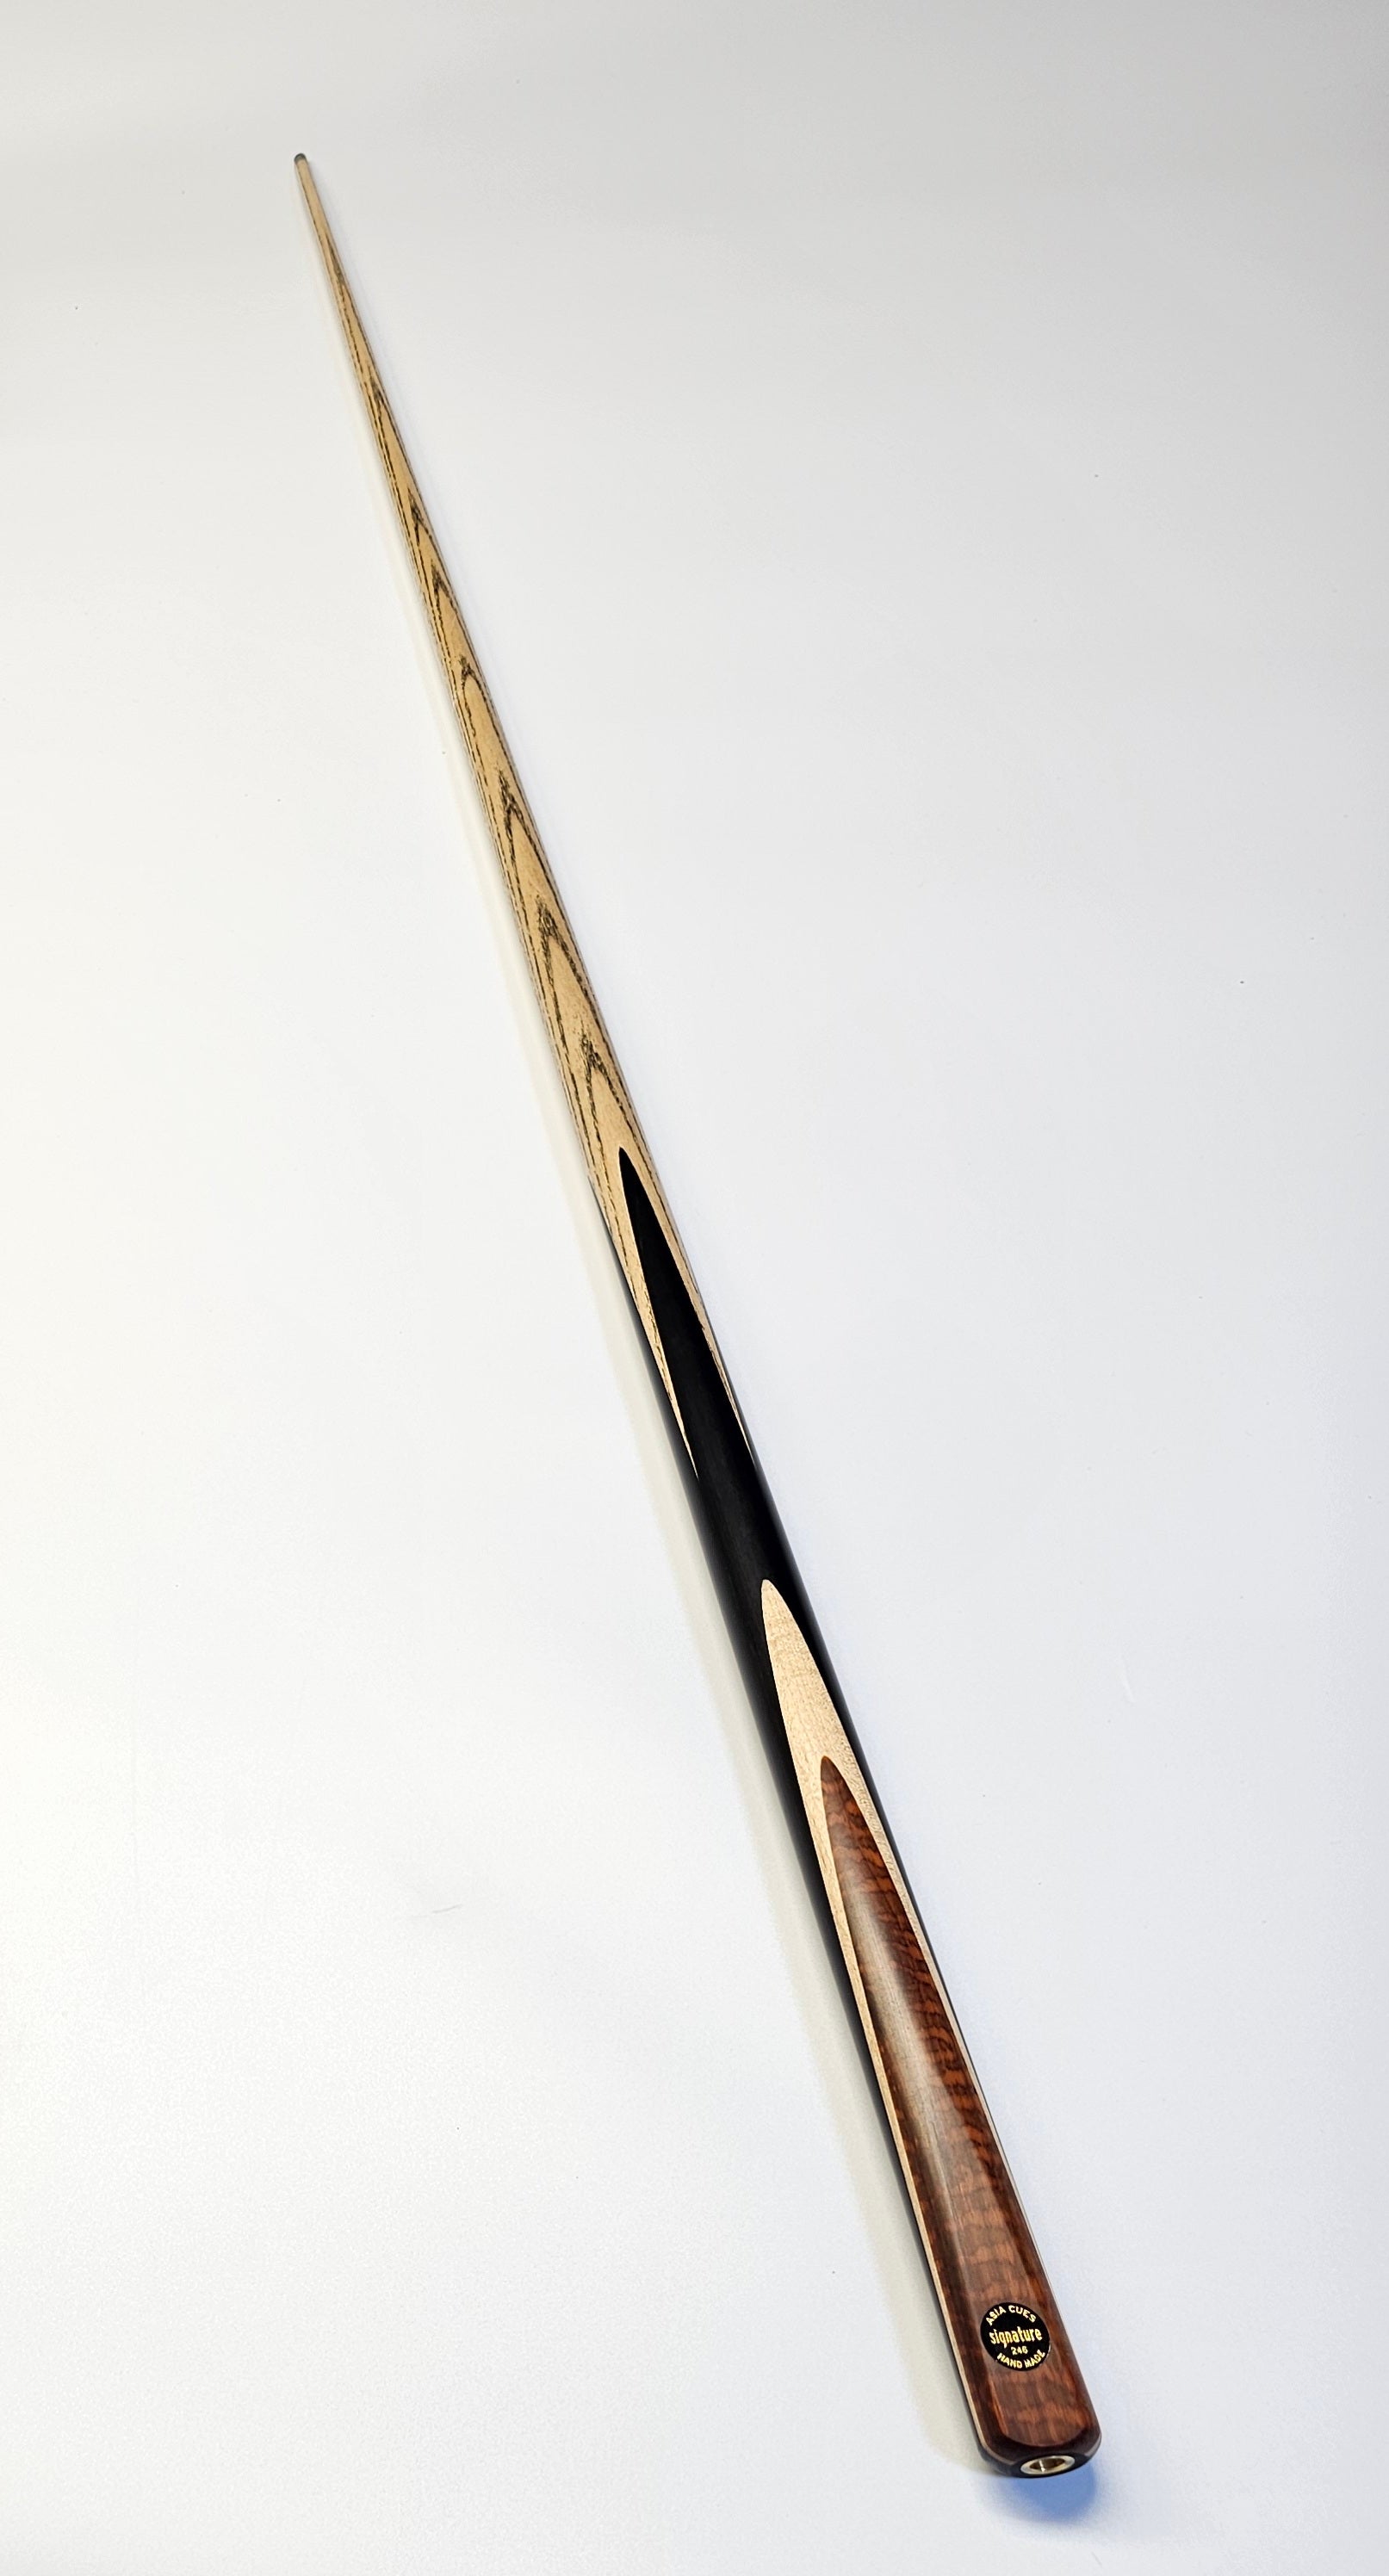 Asia Cues Signature No.246 - One Piece Snooker Cue 9.4mm, 18oz, 58"